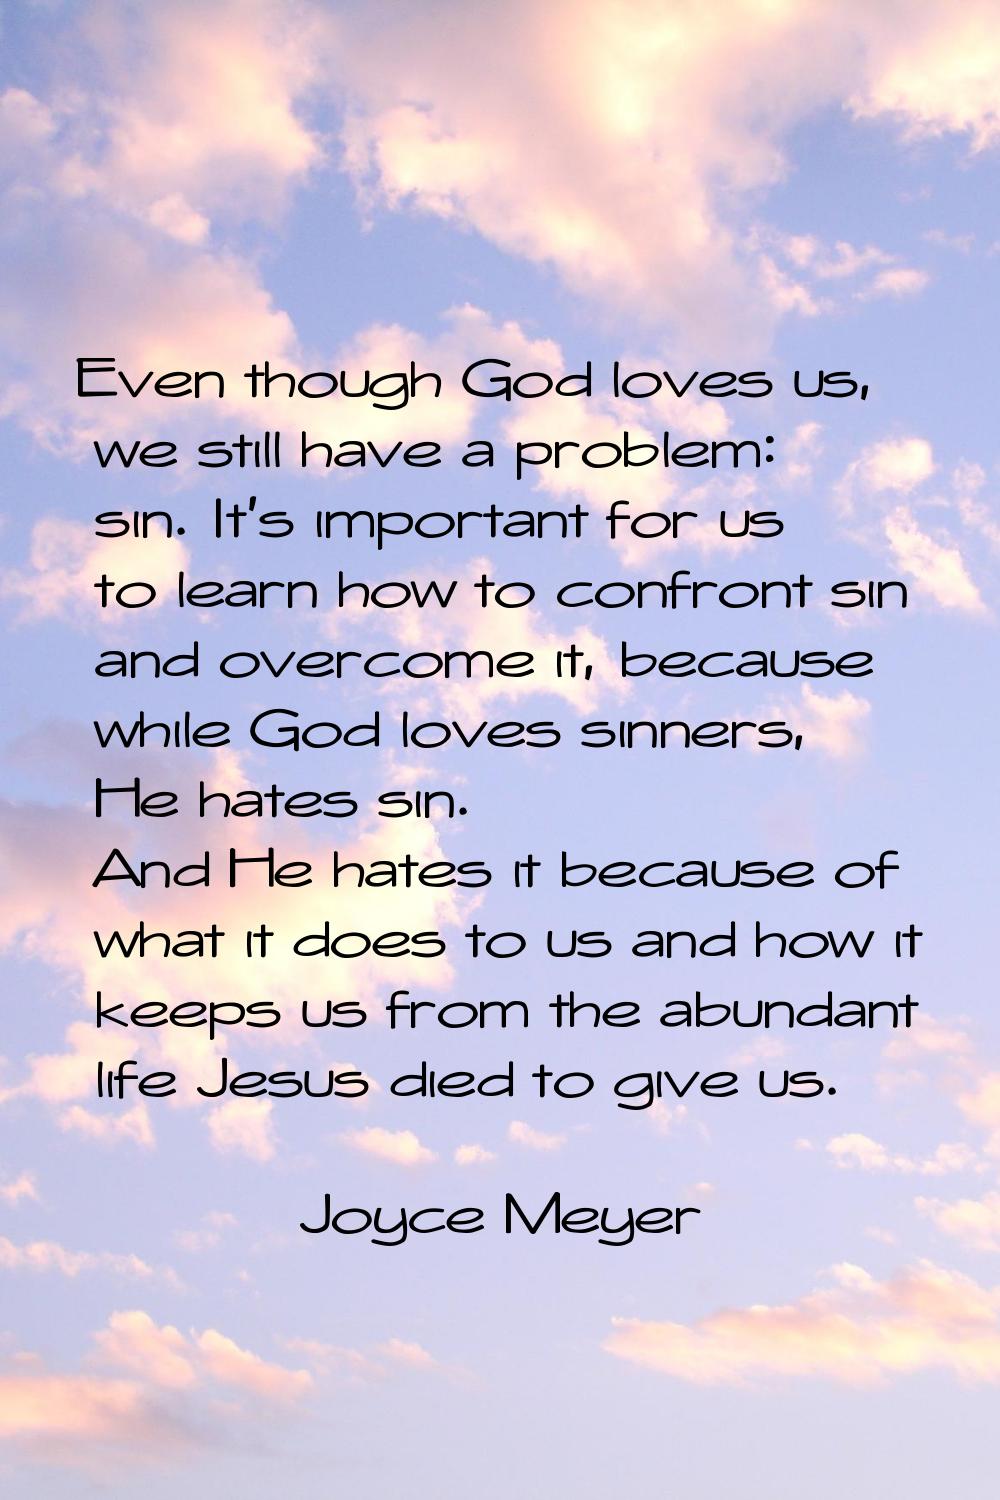 Even though God loves us, we still have a problem: sin. It's important for us to learn how to confr